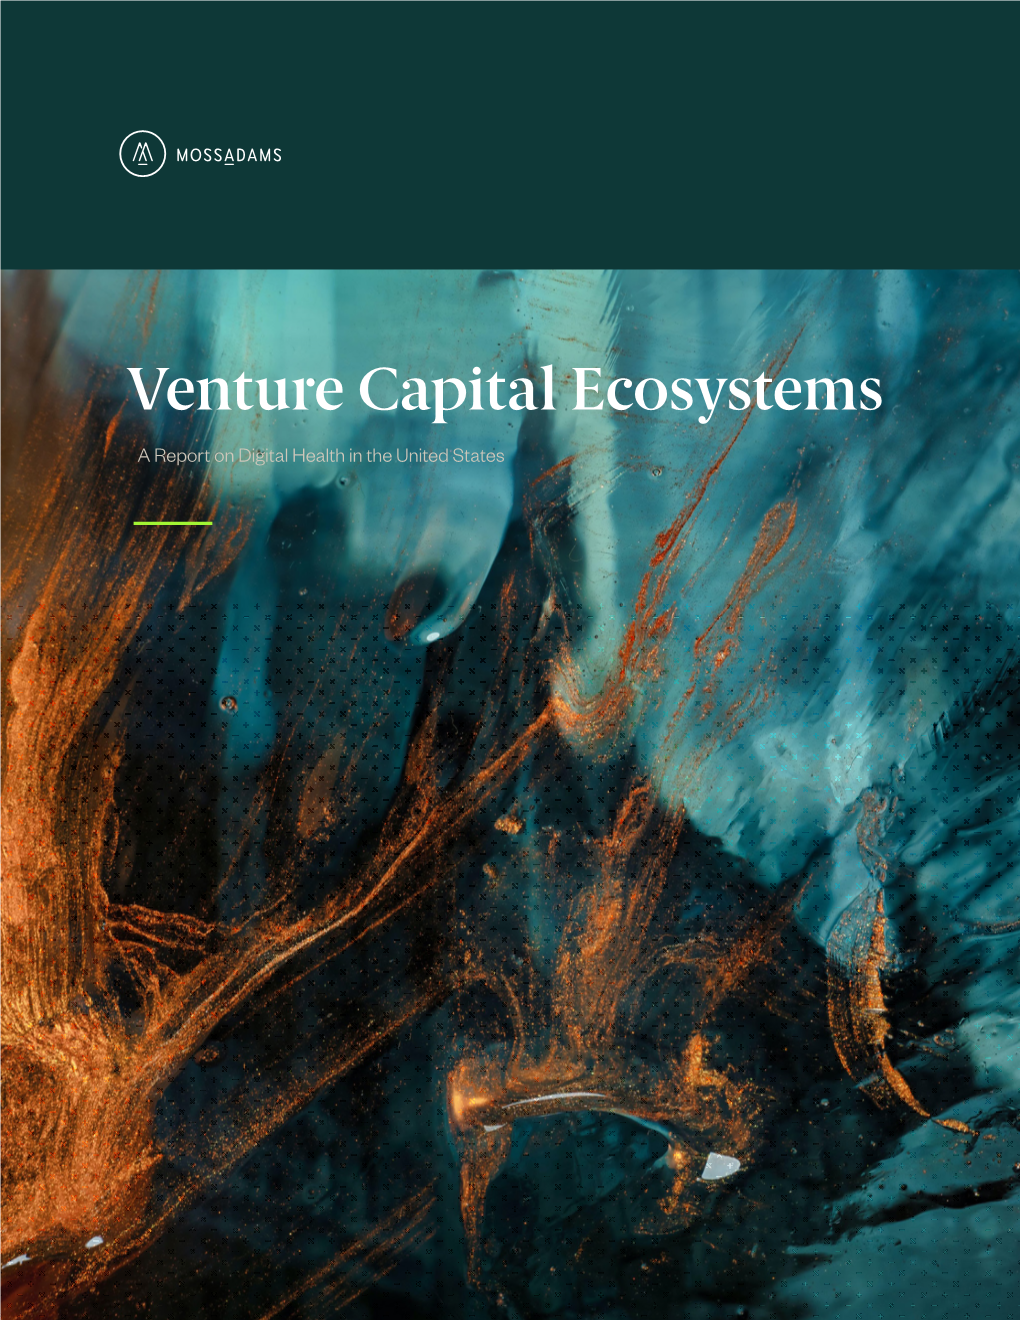 Venture Capital Ecosystems: Digital Health in the United States